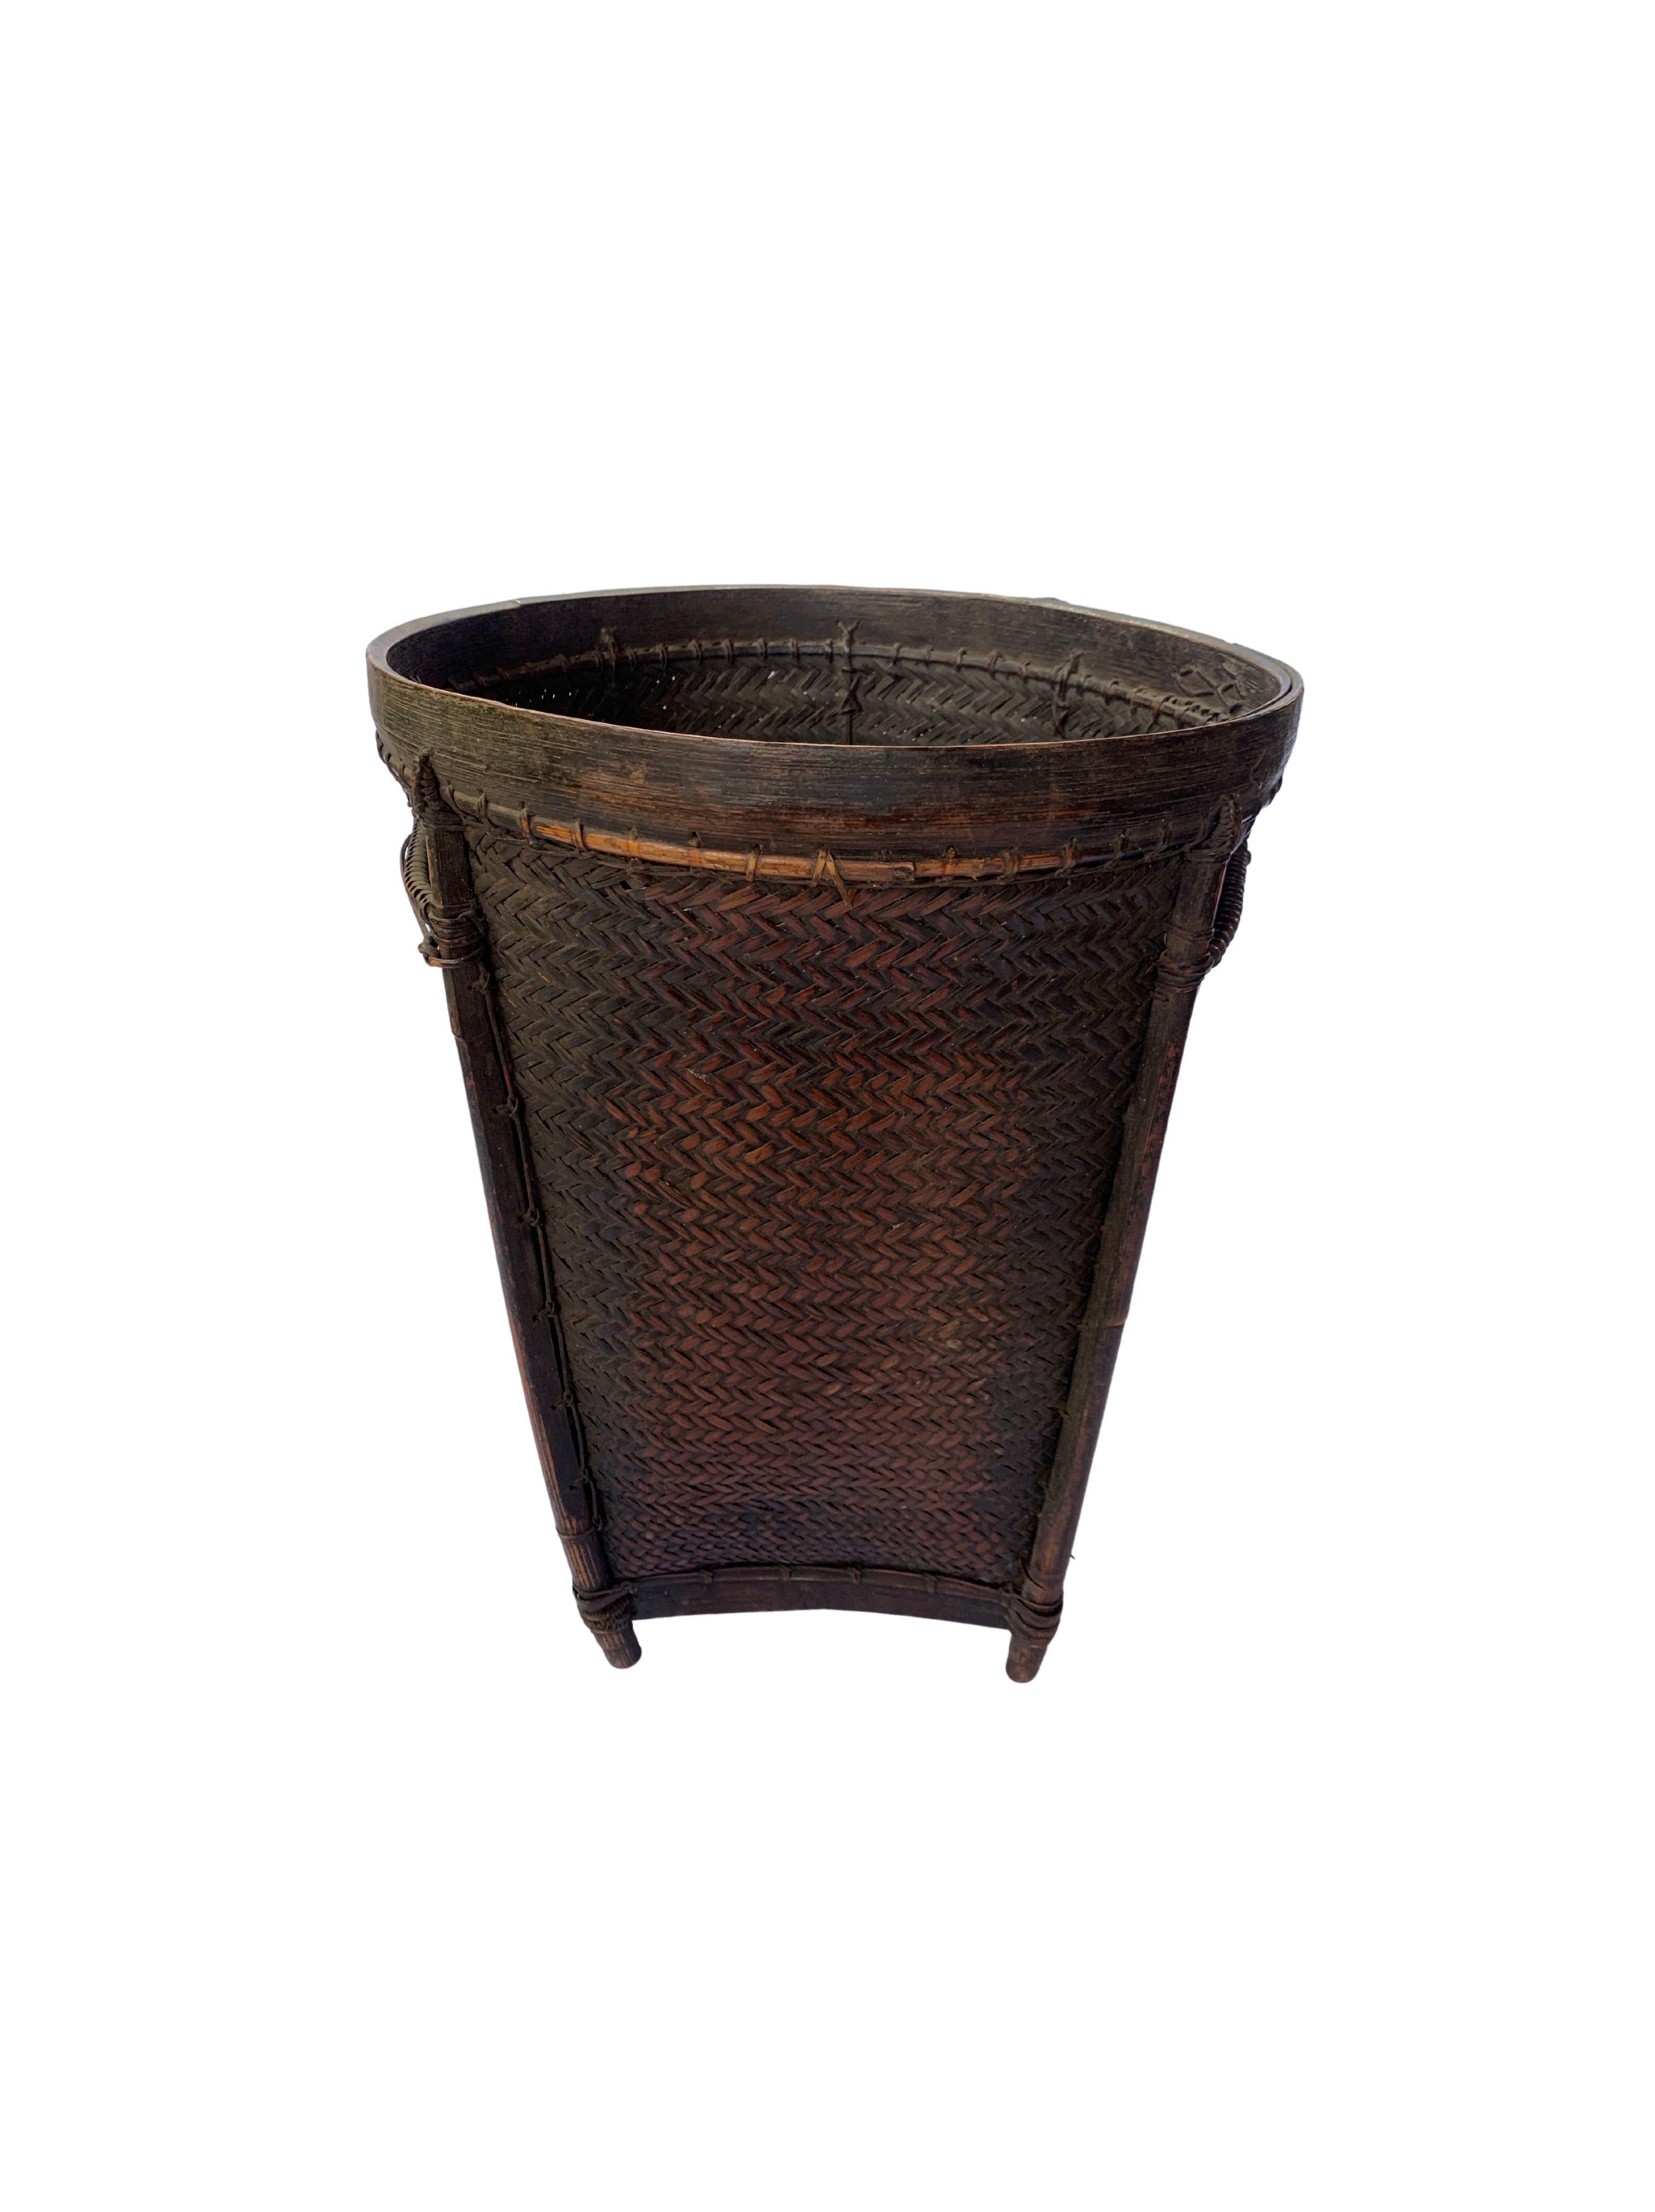 This vintage hand-woven basket originates from the Dayak tribe of Borneo crafted with rattan fibres and an ironwood frame and rim. These baskets are used to carry leaves, fruit, grain and wood. This basket features beautiful extended